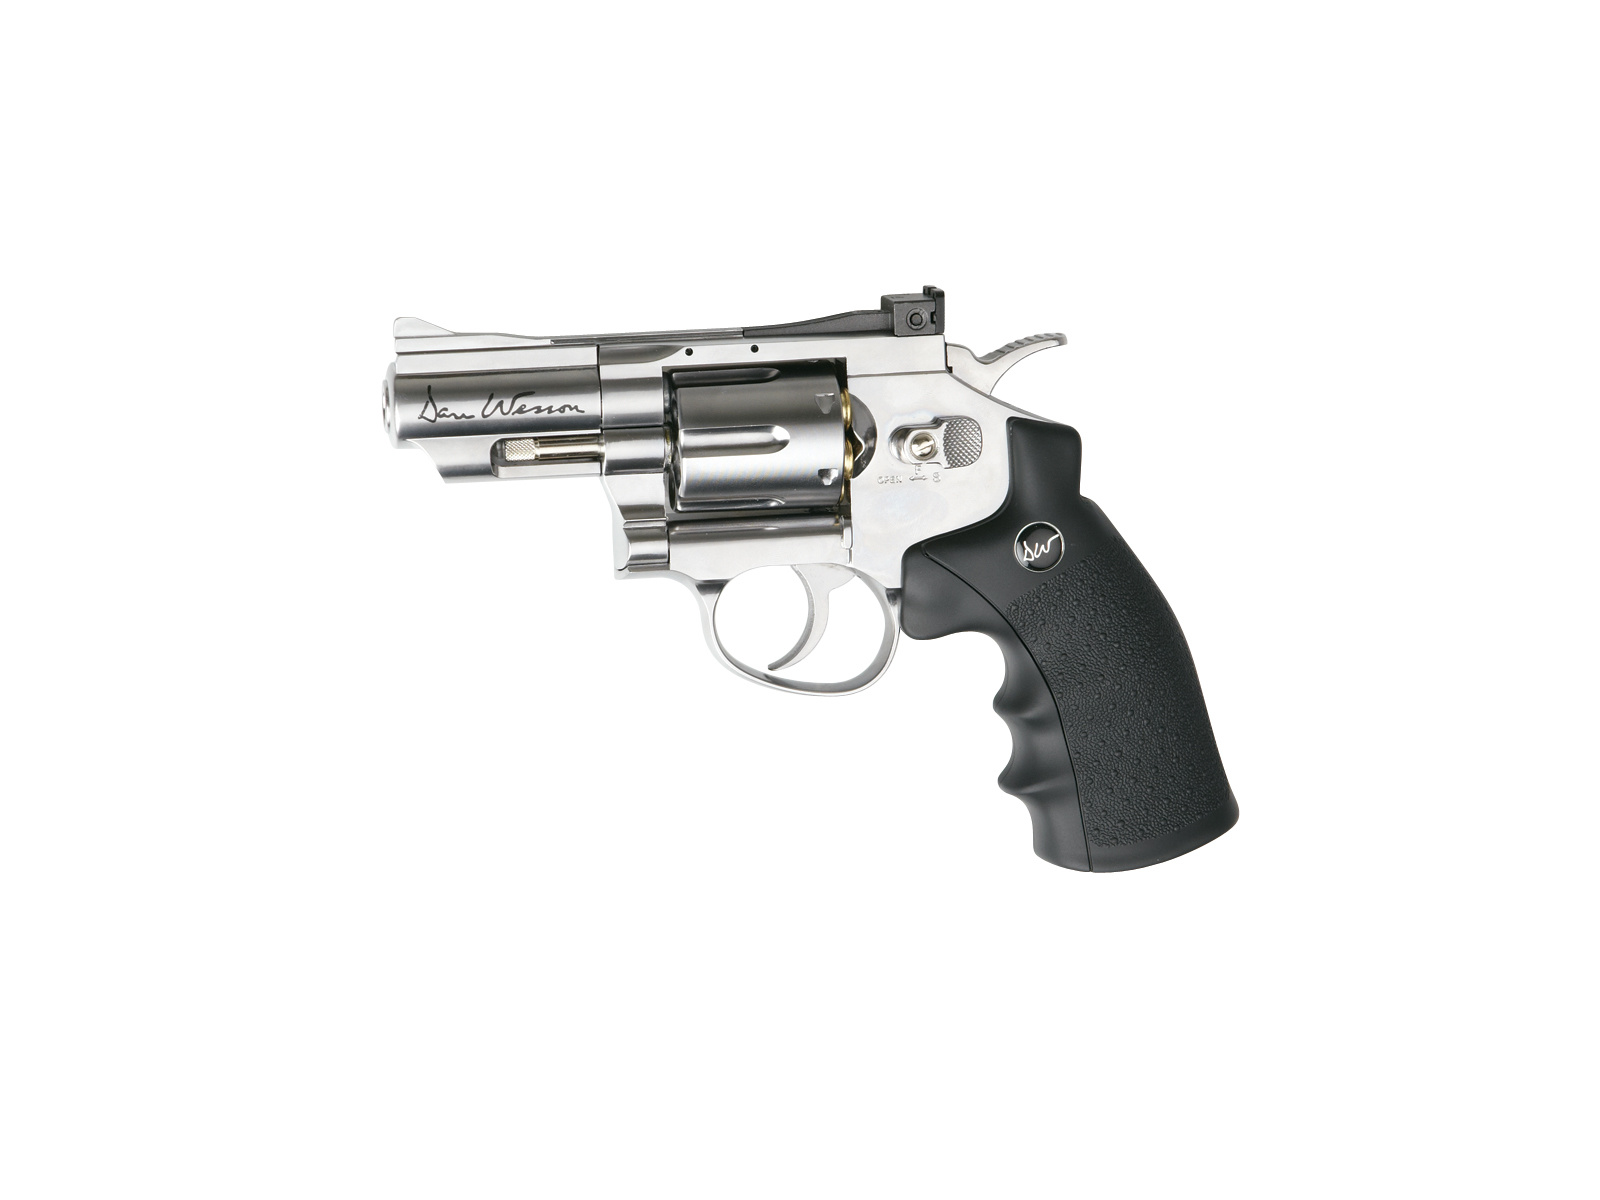 ASG 2.5 Inch Dan Wesson Silver Pellet 4.5 mm BB 2.7 Joules - Silver